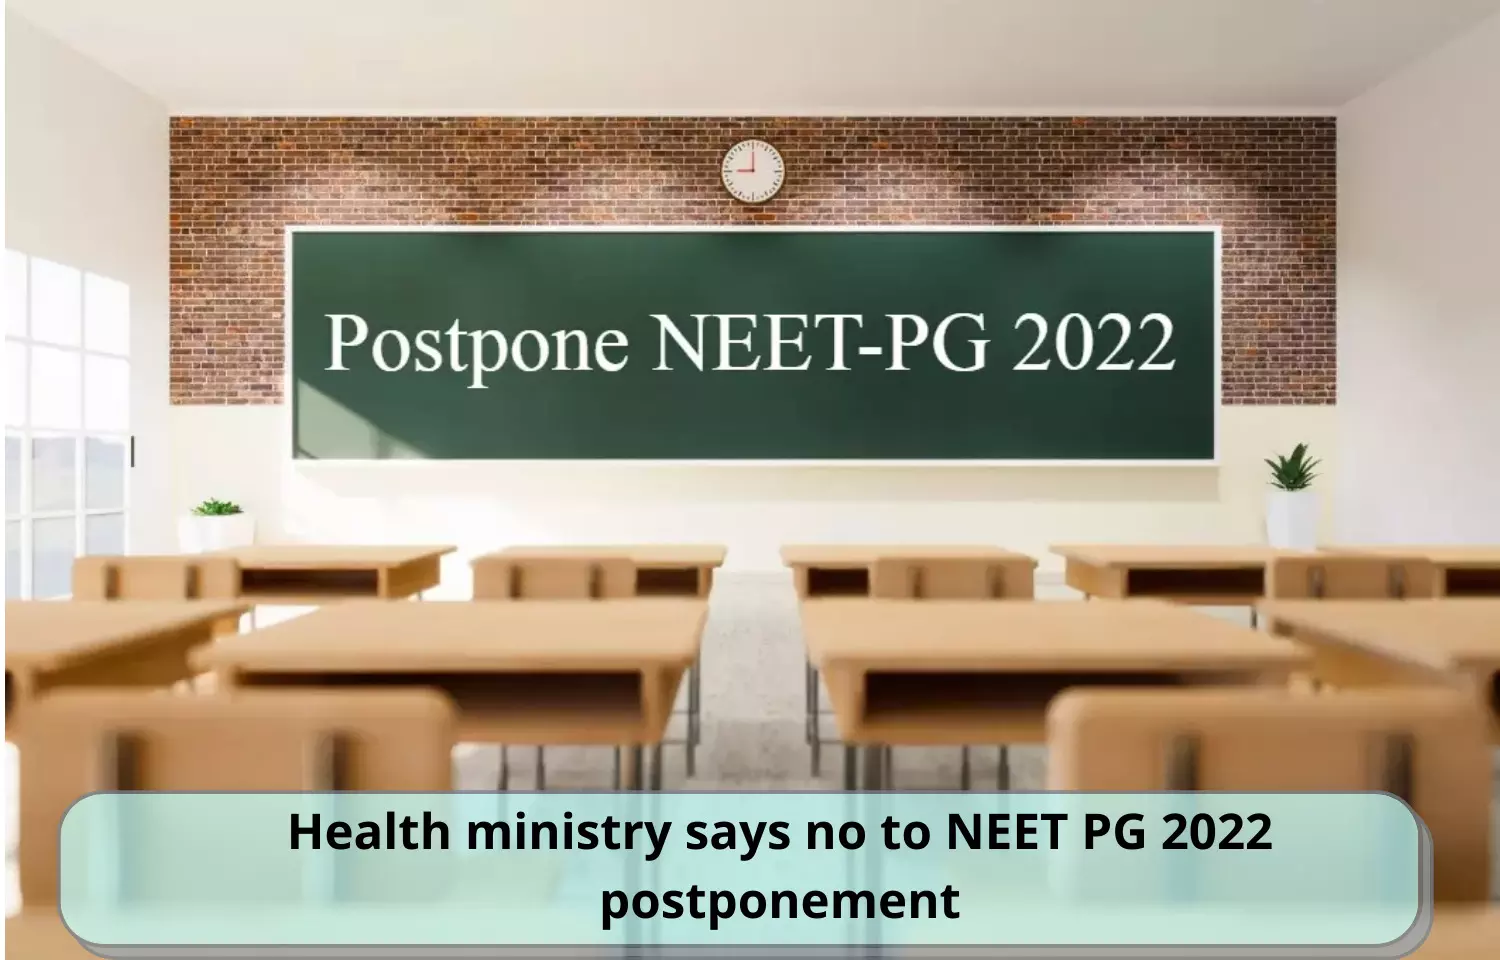 Health ministry says no to NEET PG 2022 postponement